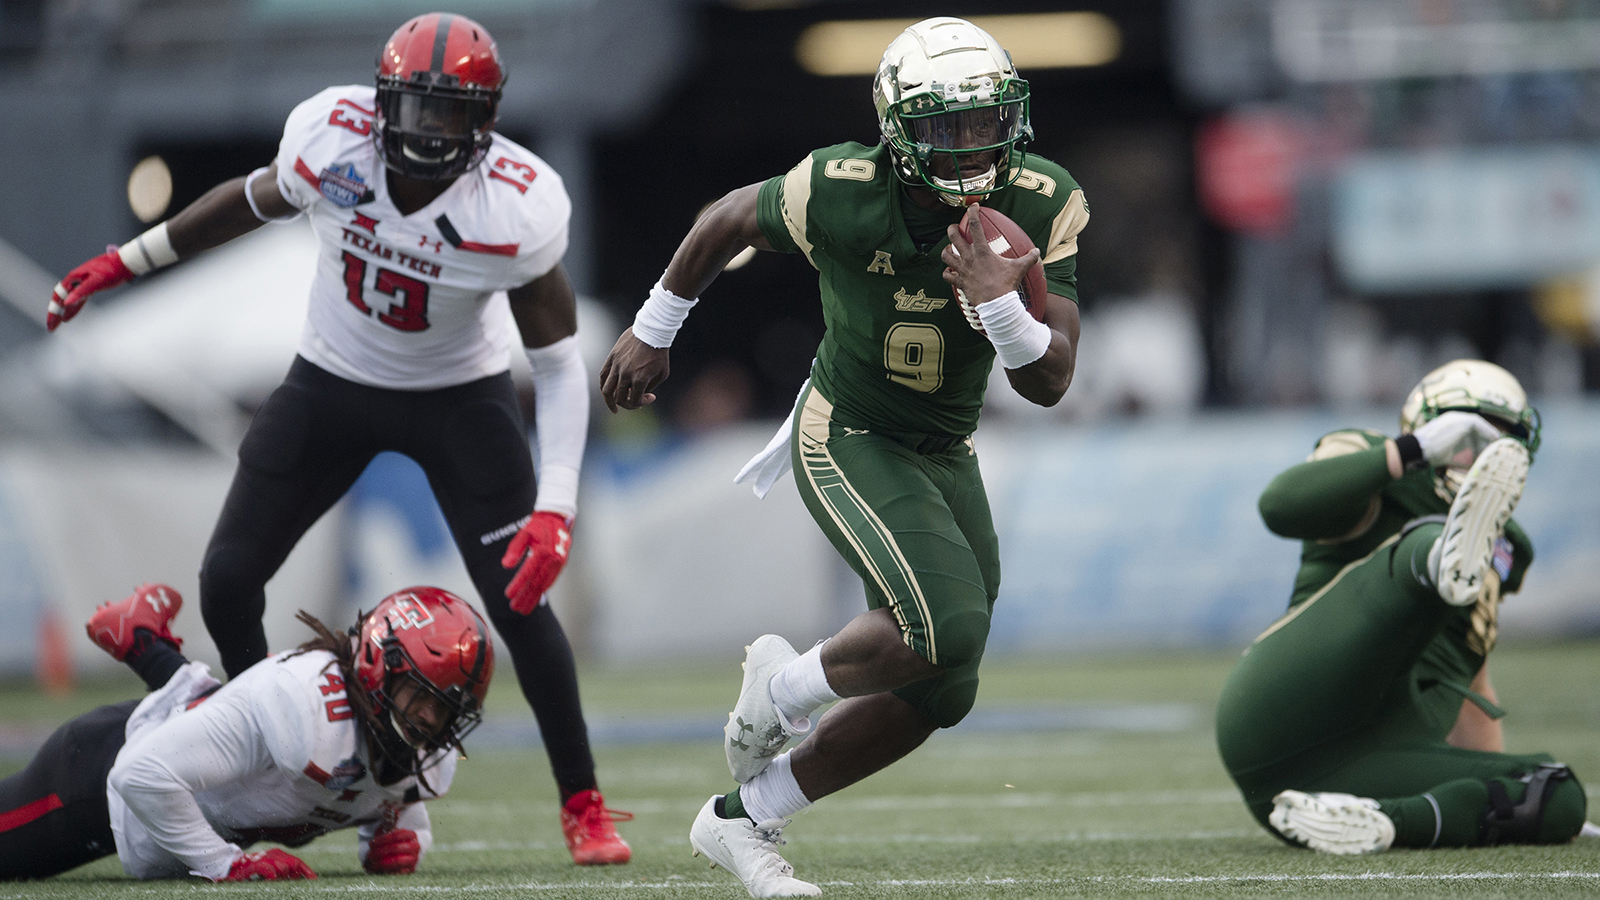 Flowers power: USF overtakes Texas Tech in final minute to win Birmingham Bowl